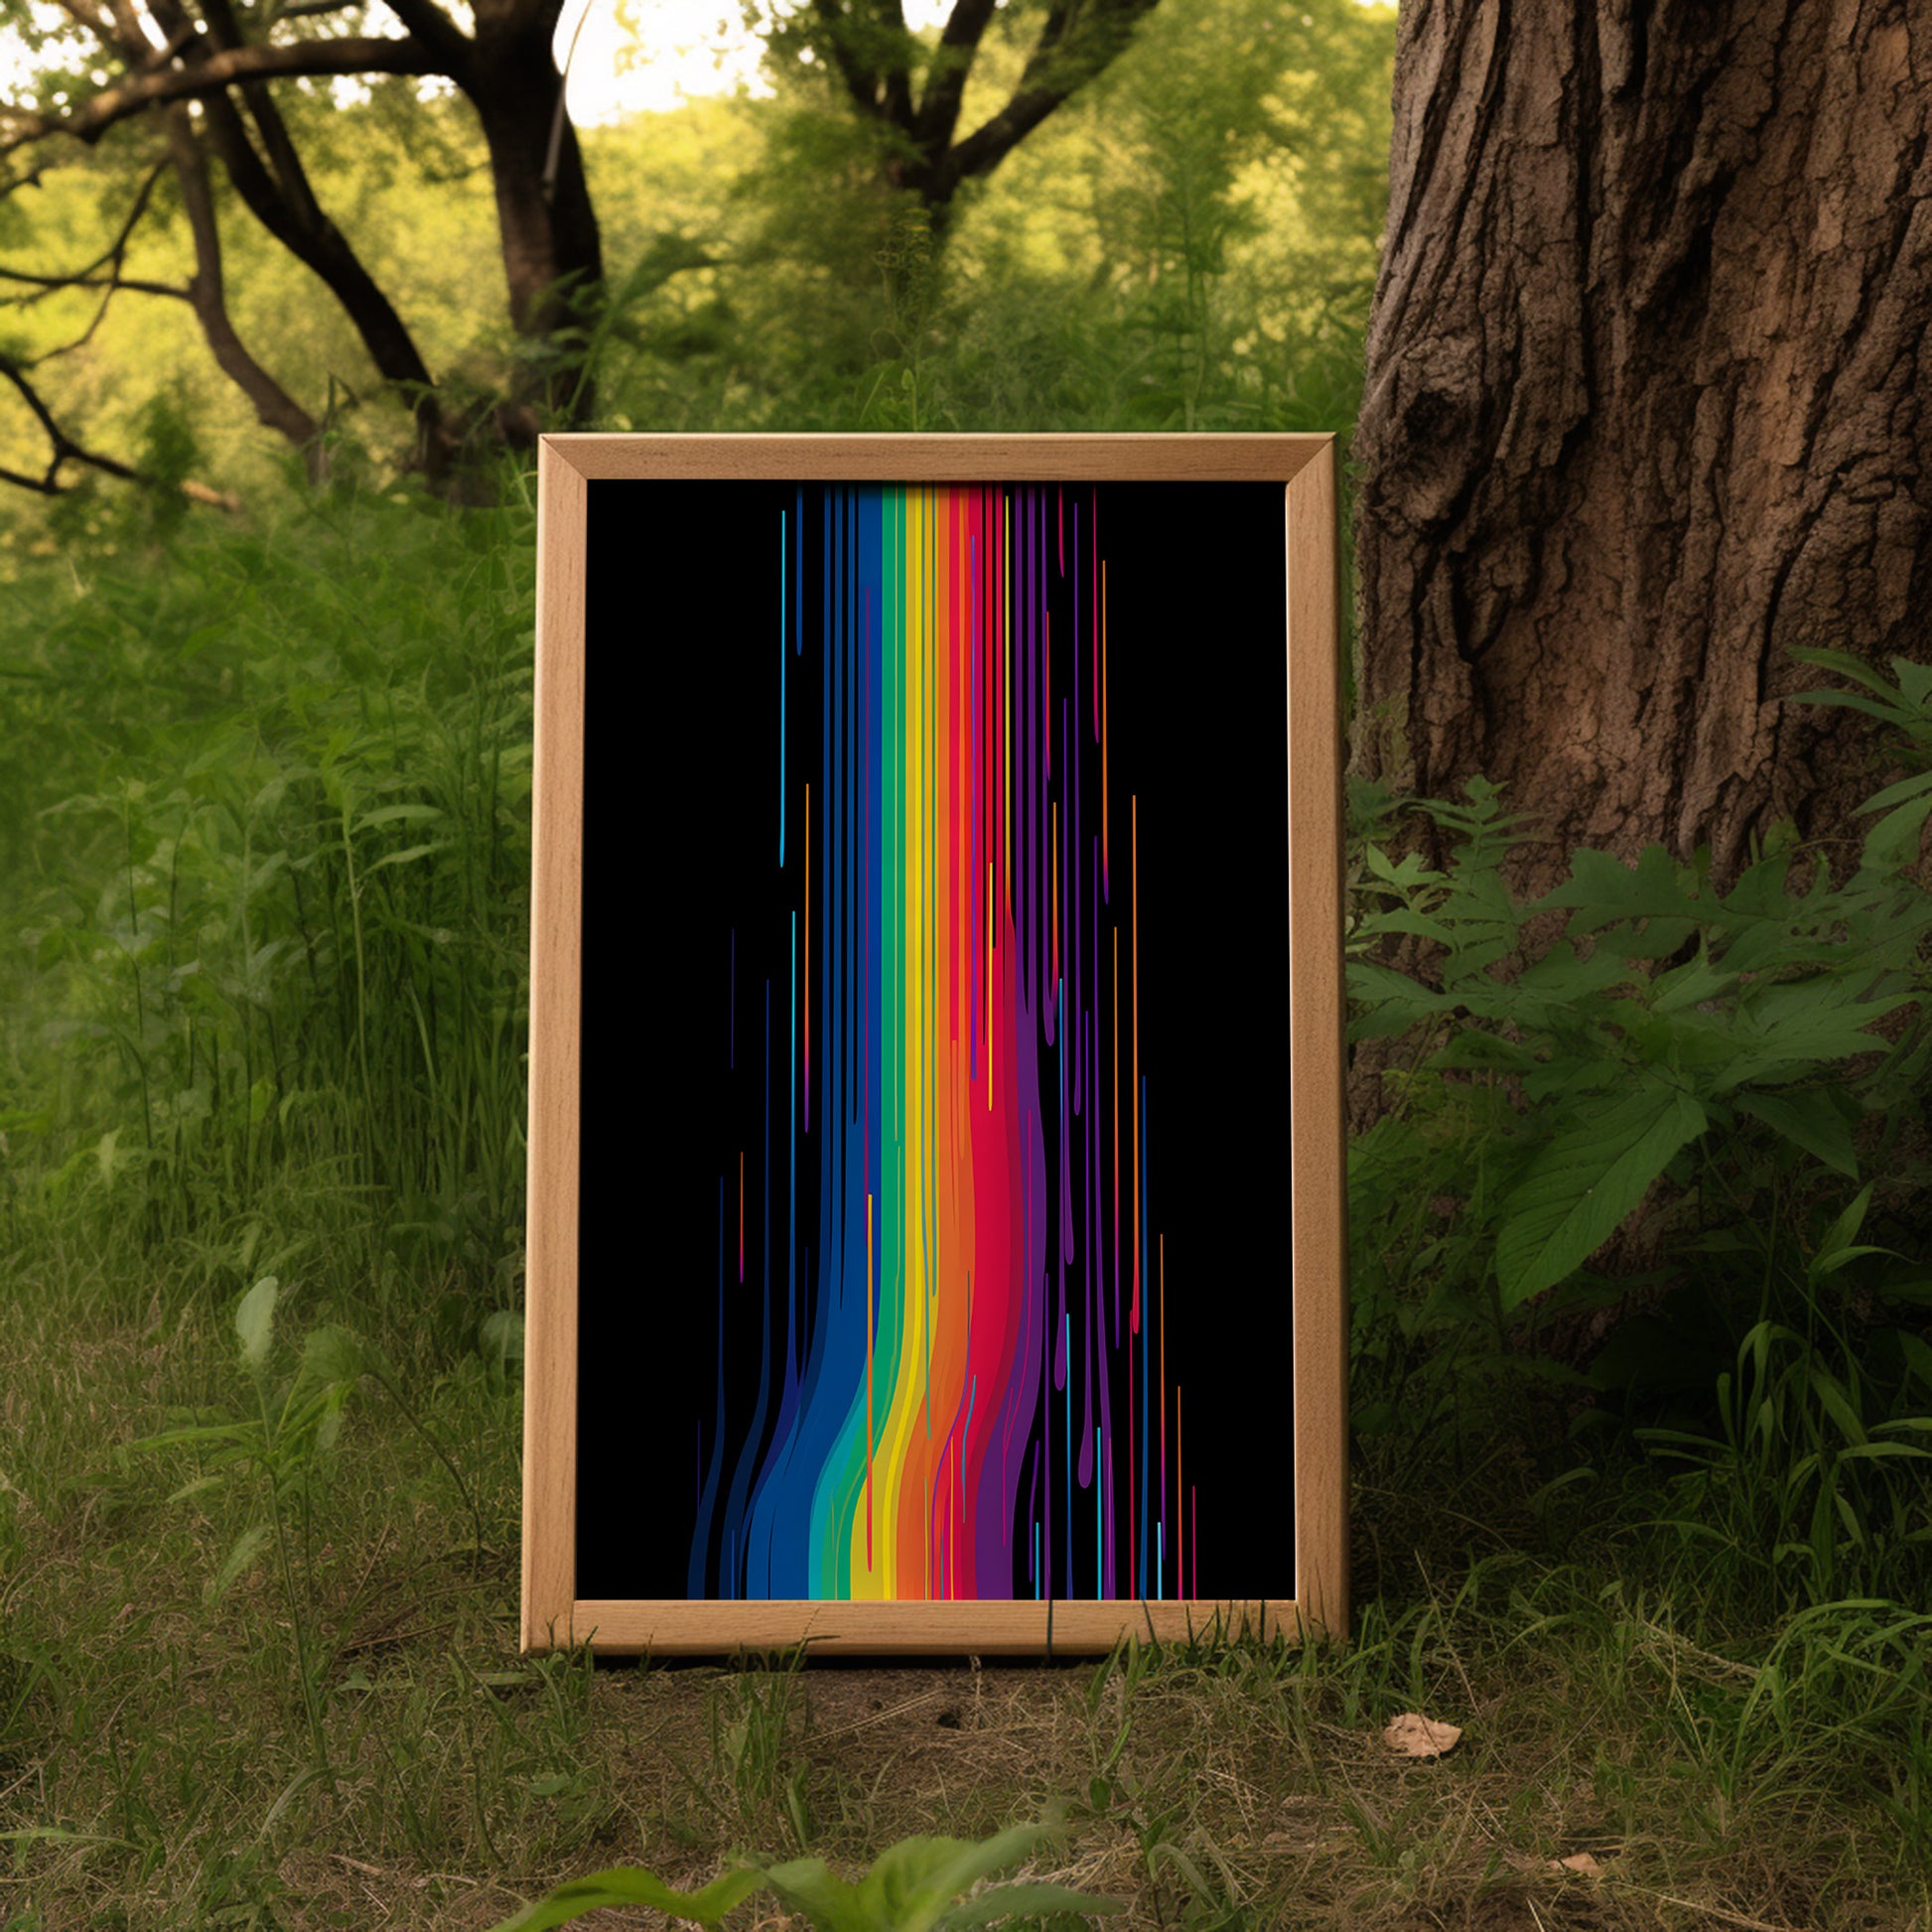 A colorful abstract painting displayed on an easel in a lush forest setting.